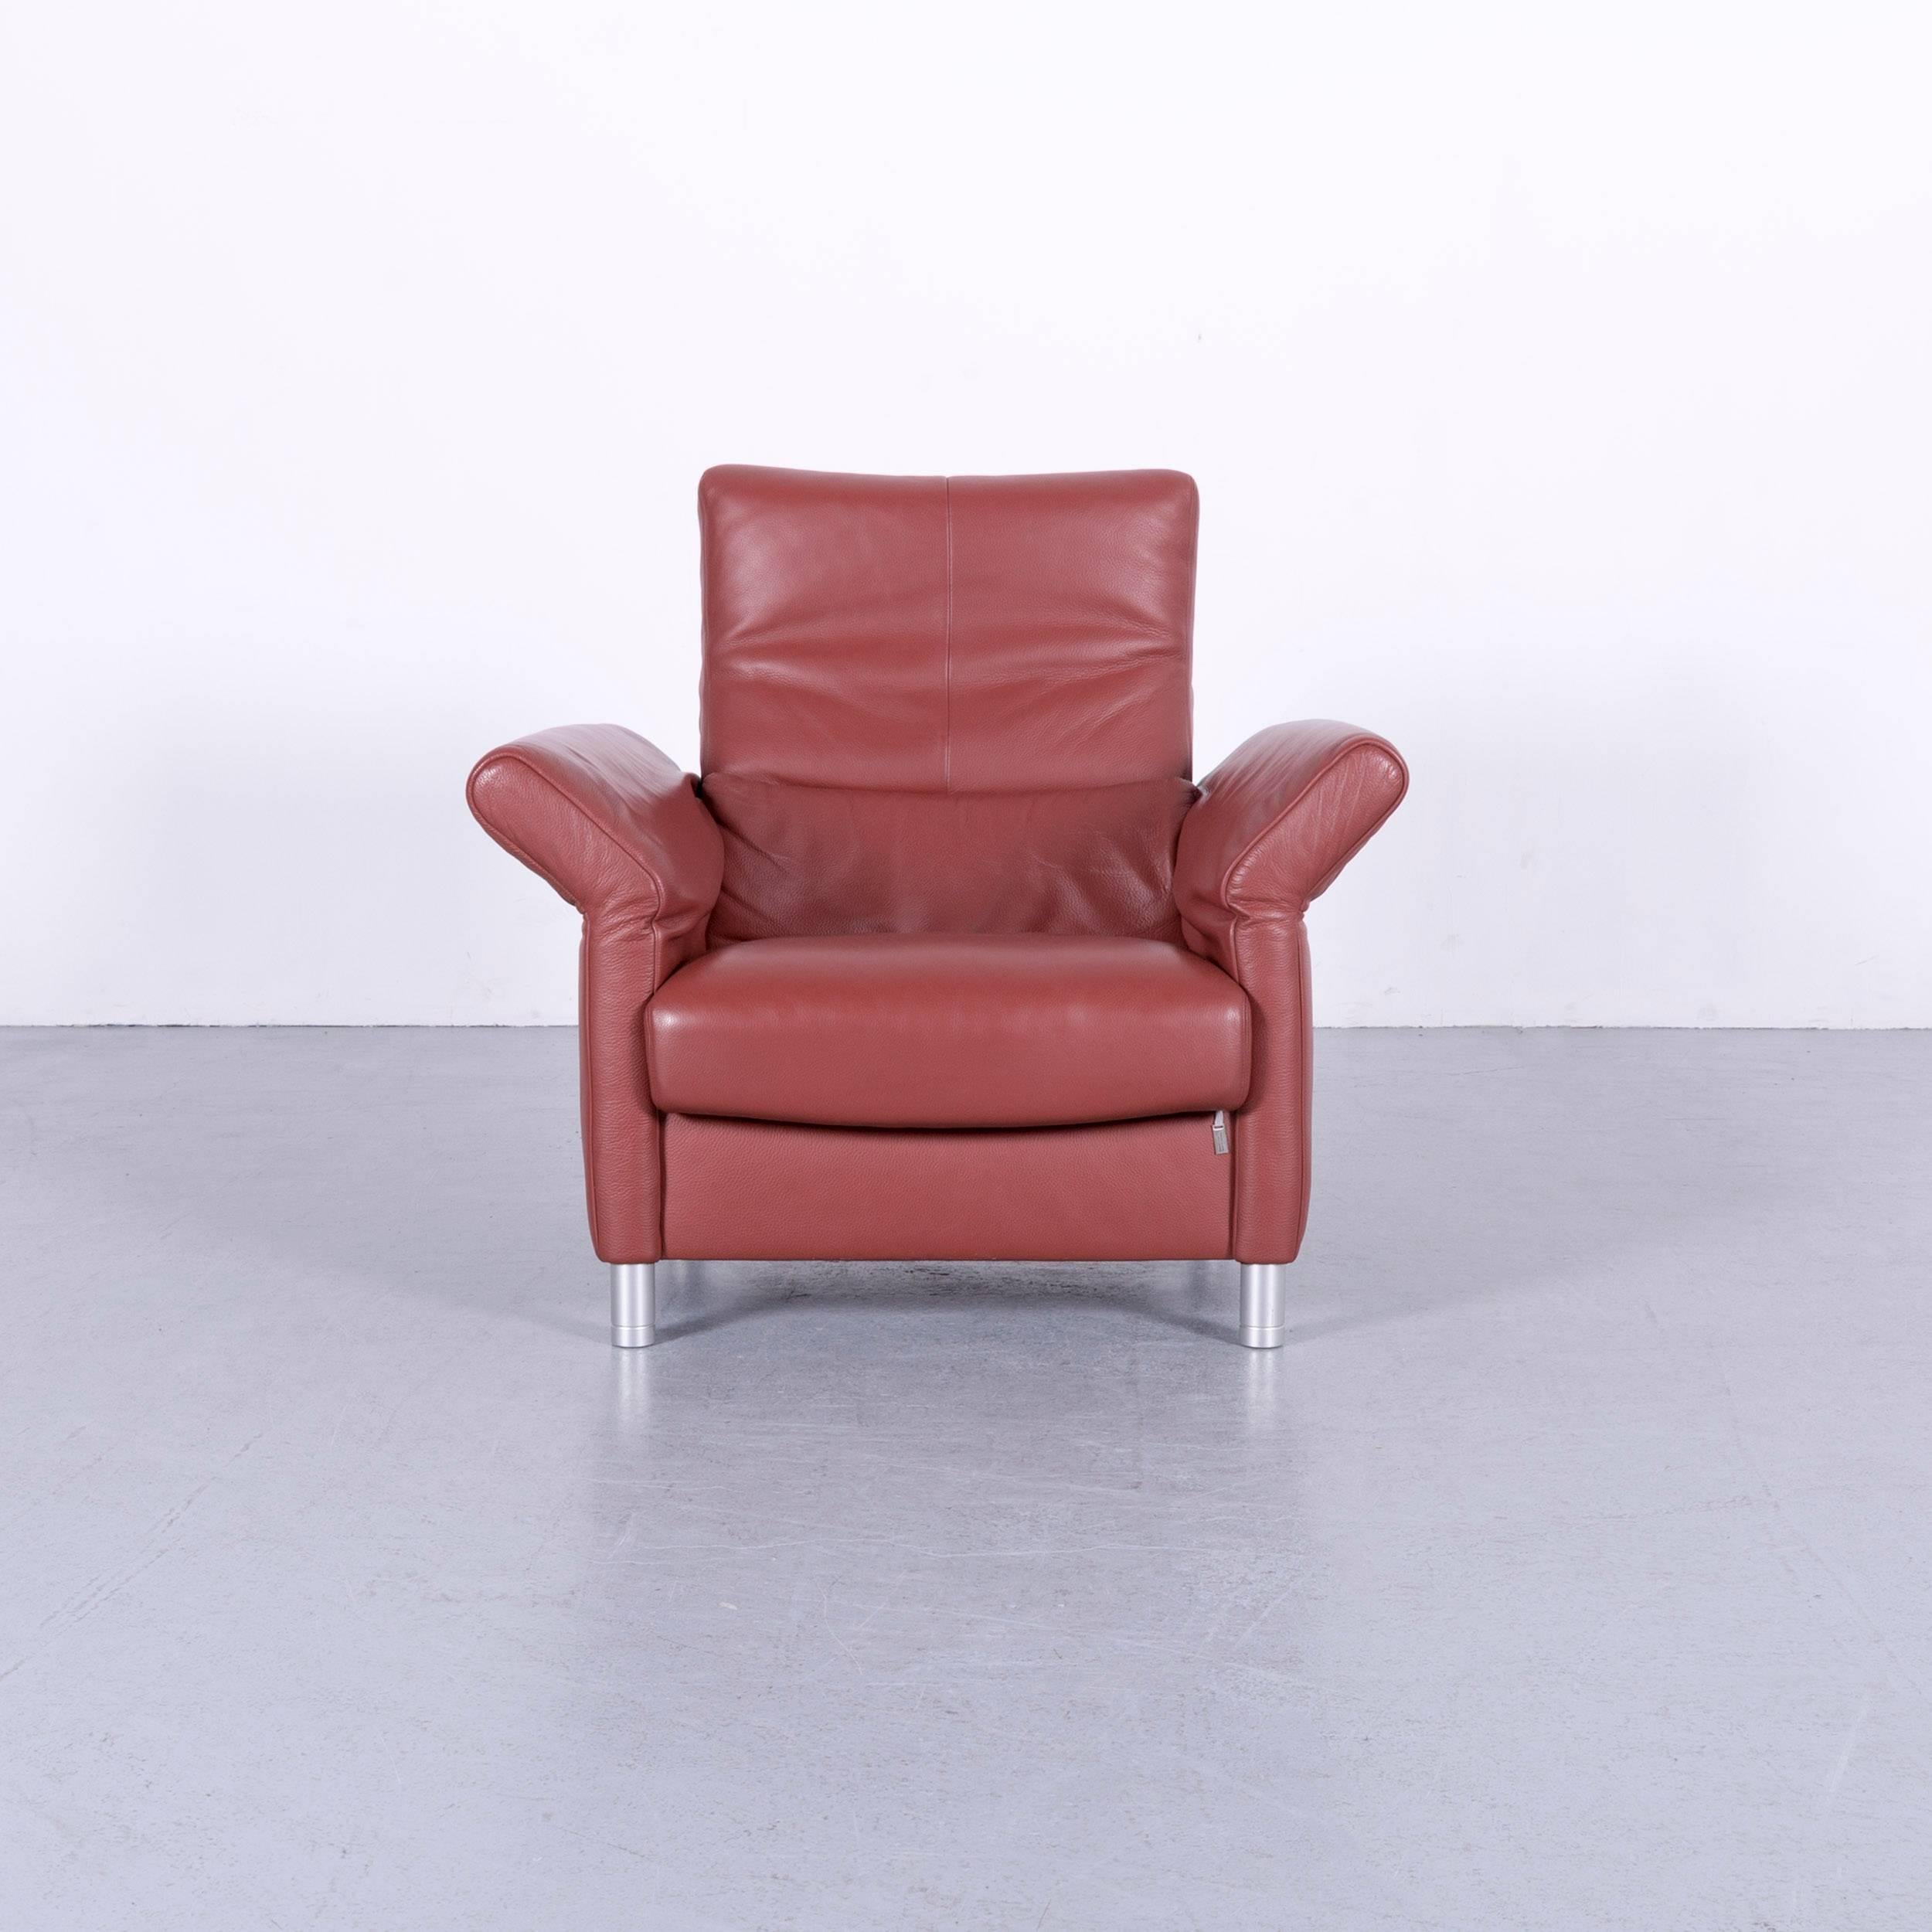 Erpo Designer Leather Armchair Brown One-Seat In Excellent Condition For Sale In Cologne, DE